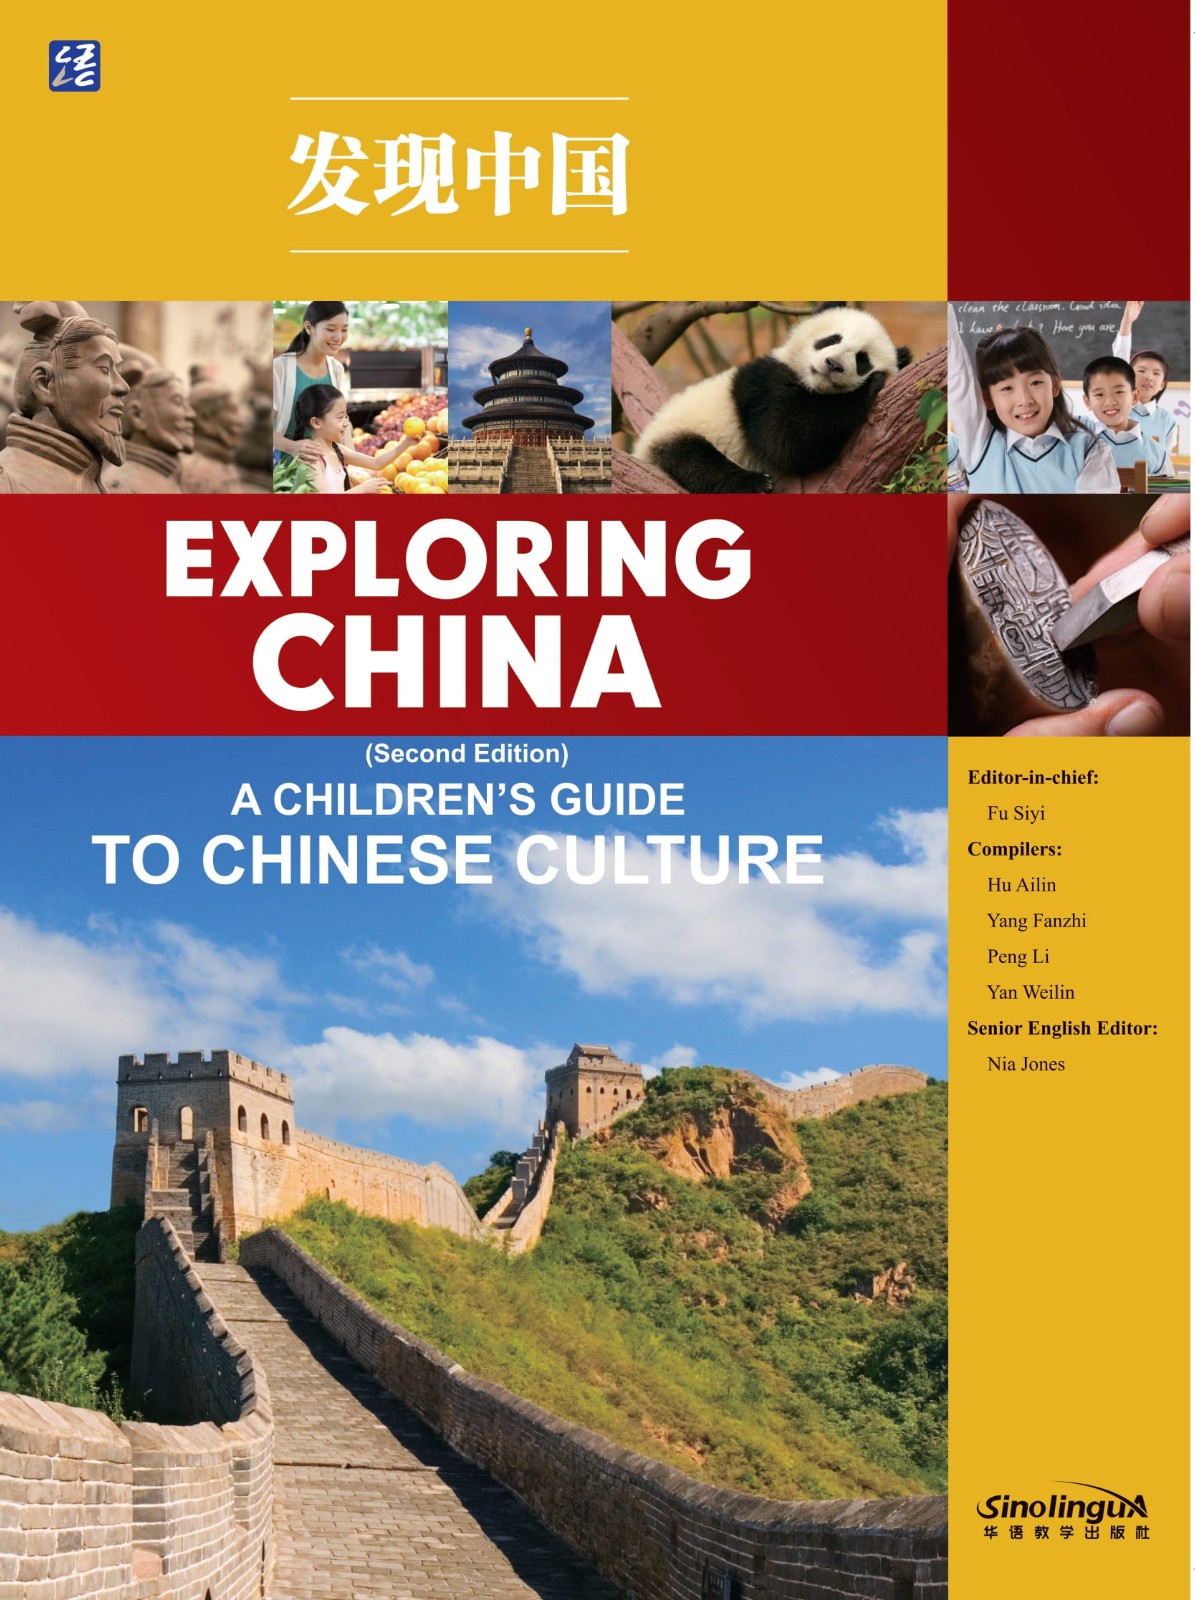 Exploring China （A Children's Guide to Chinese Culture）(the second edition)